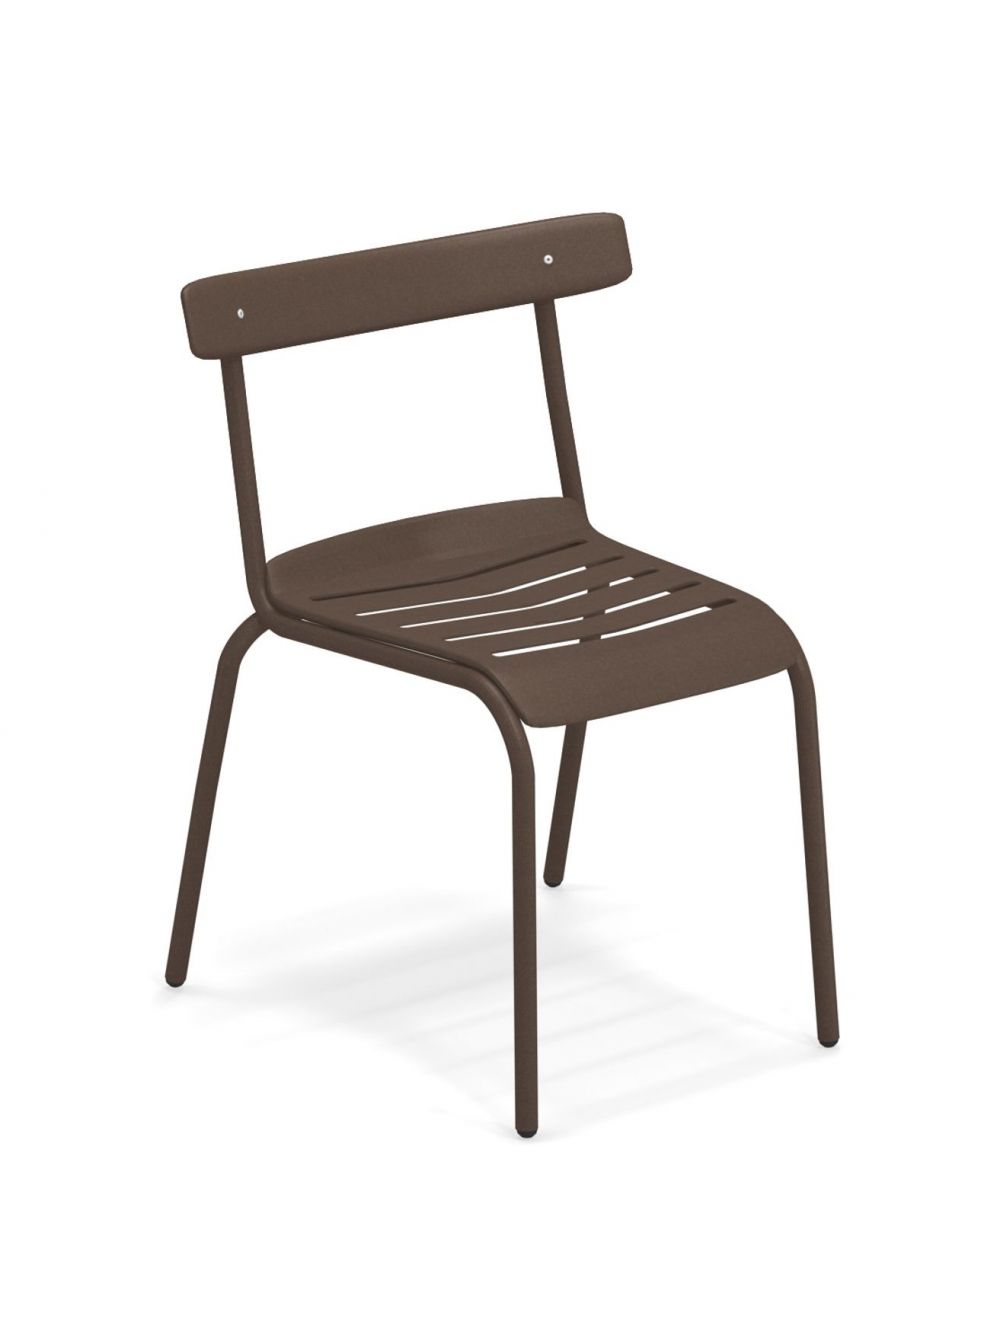 637-41_miky_stackable_chair_by_emu_online_sales_on_www.sedie_.design